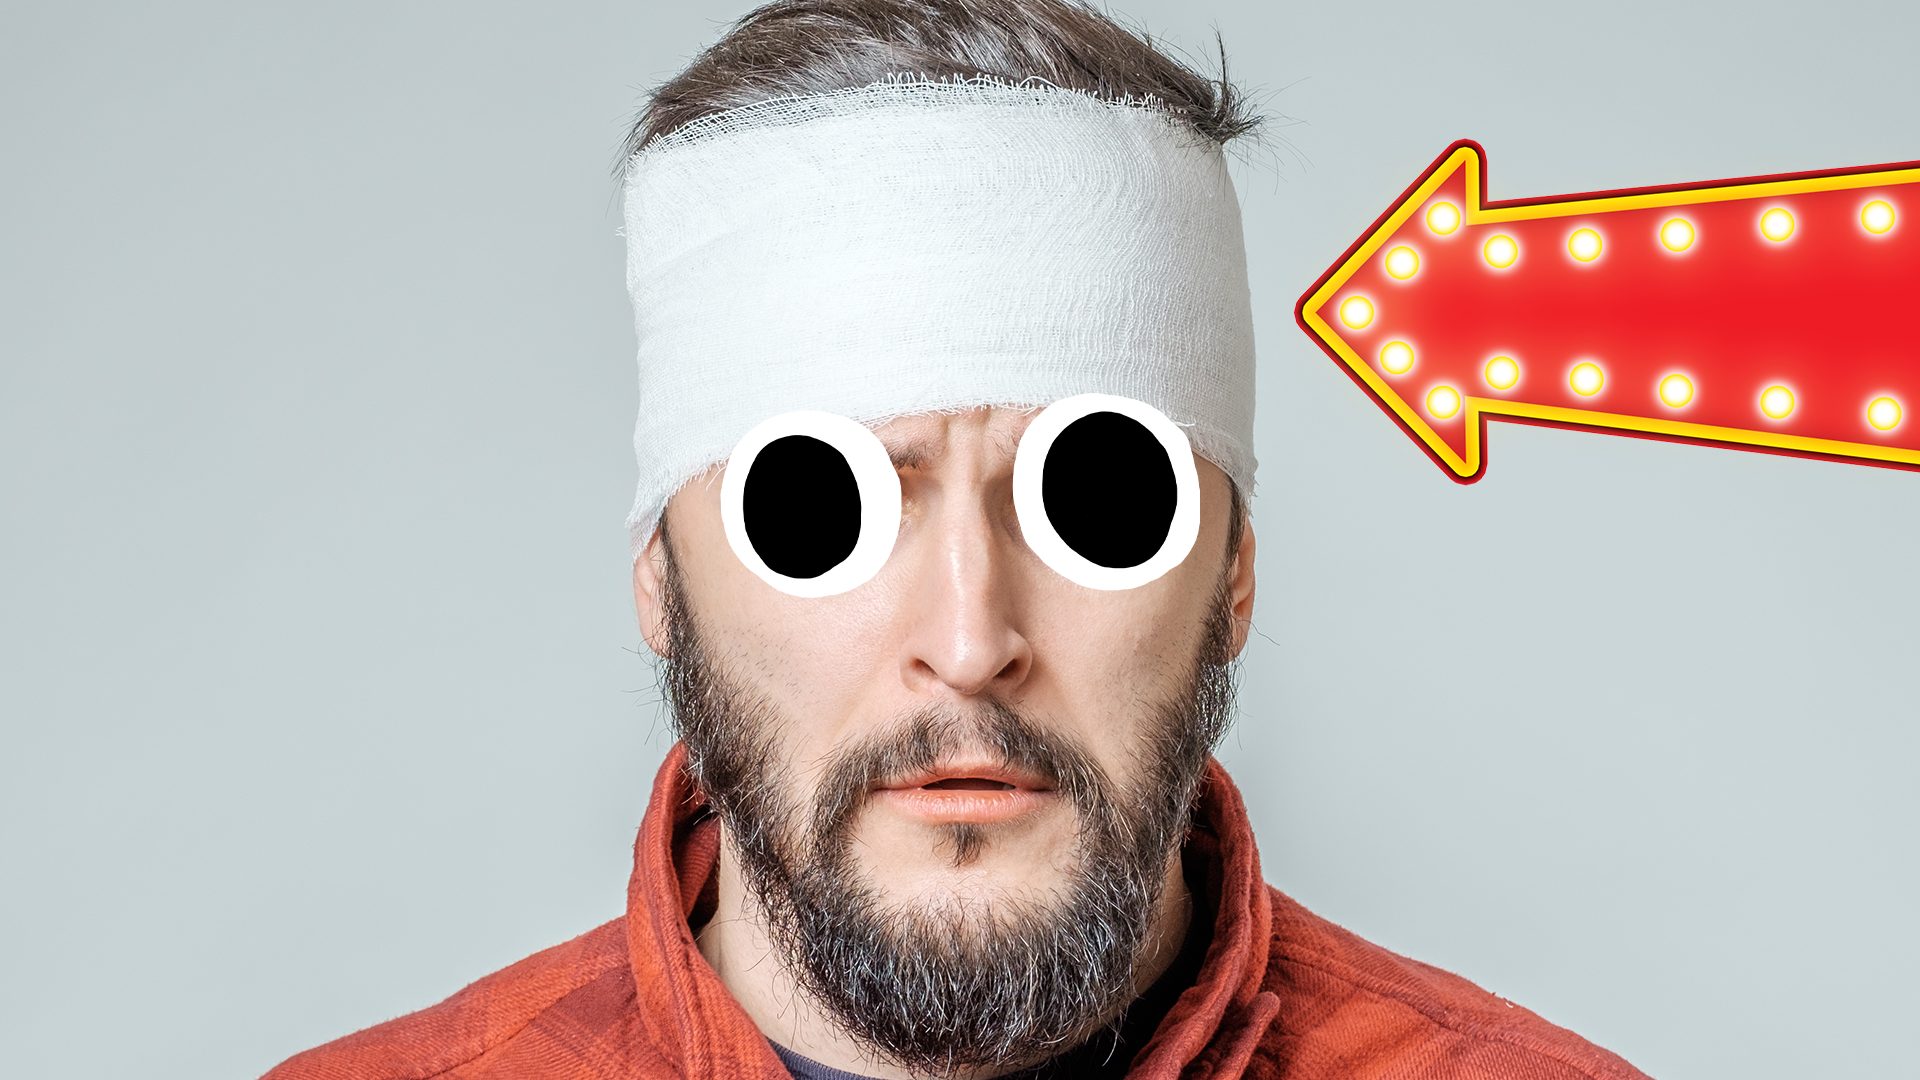 Man with a bandage on his head and arrow